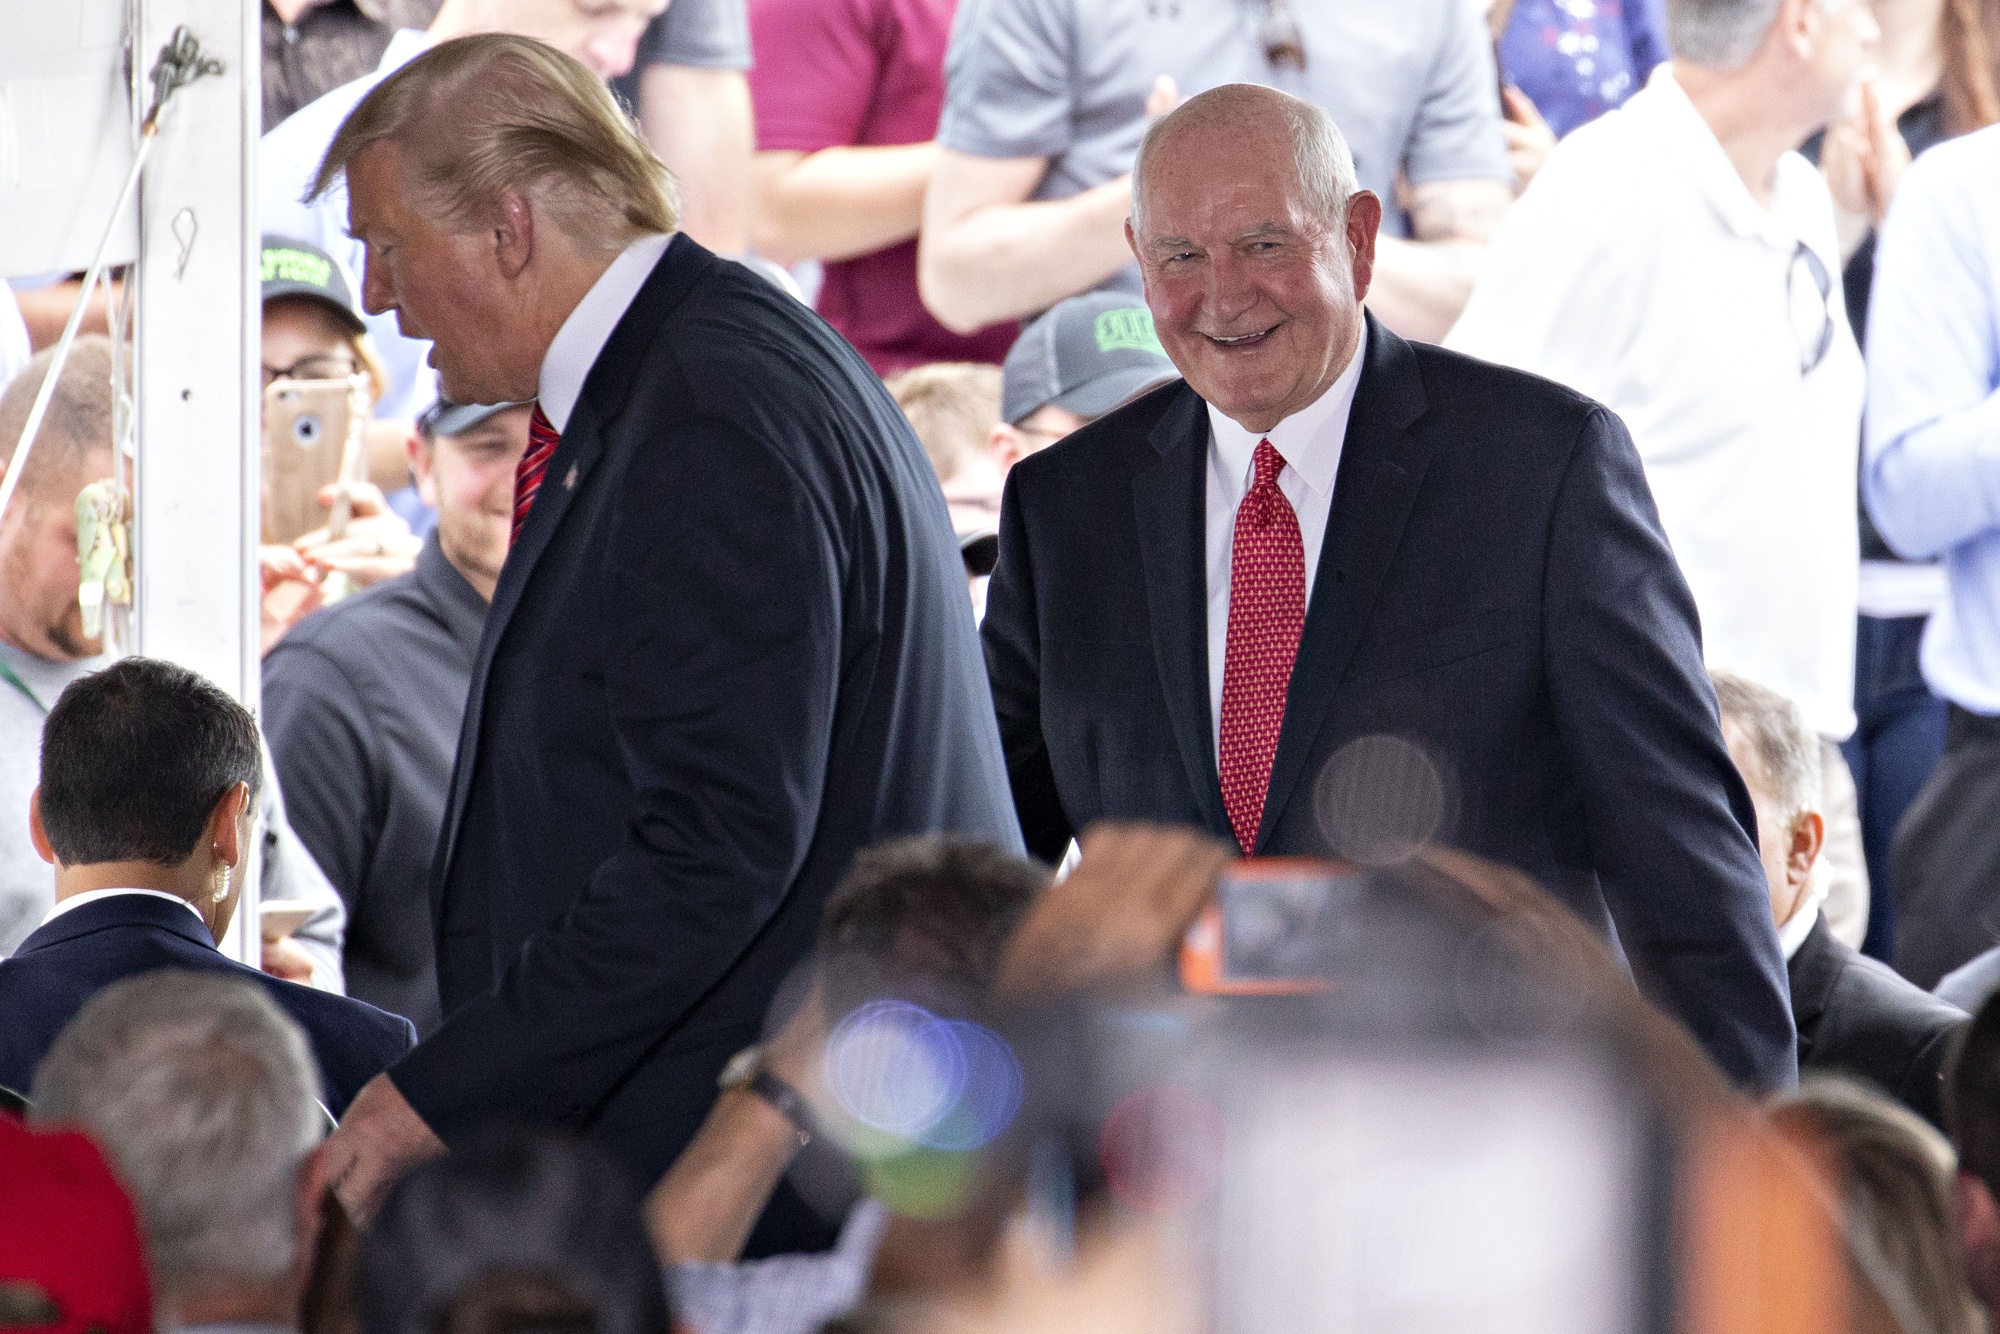 Sonny Perdue, U.S. secretary of agriculture, right, and President Donald Trump at an event&nbsp;in&nbsp;Iowa&nbsp;on&nbsp;June 11.